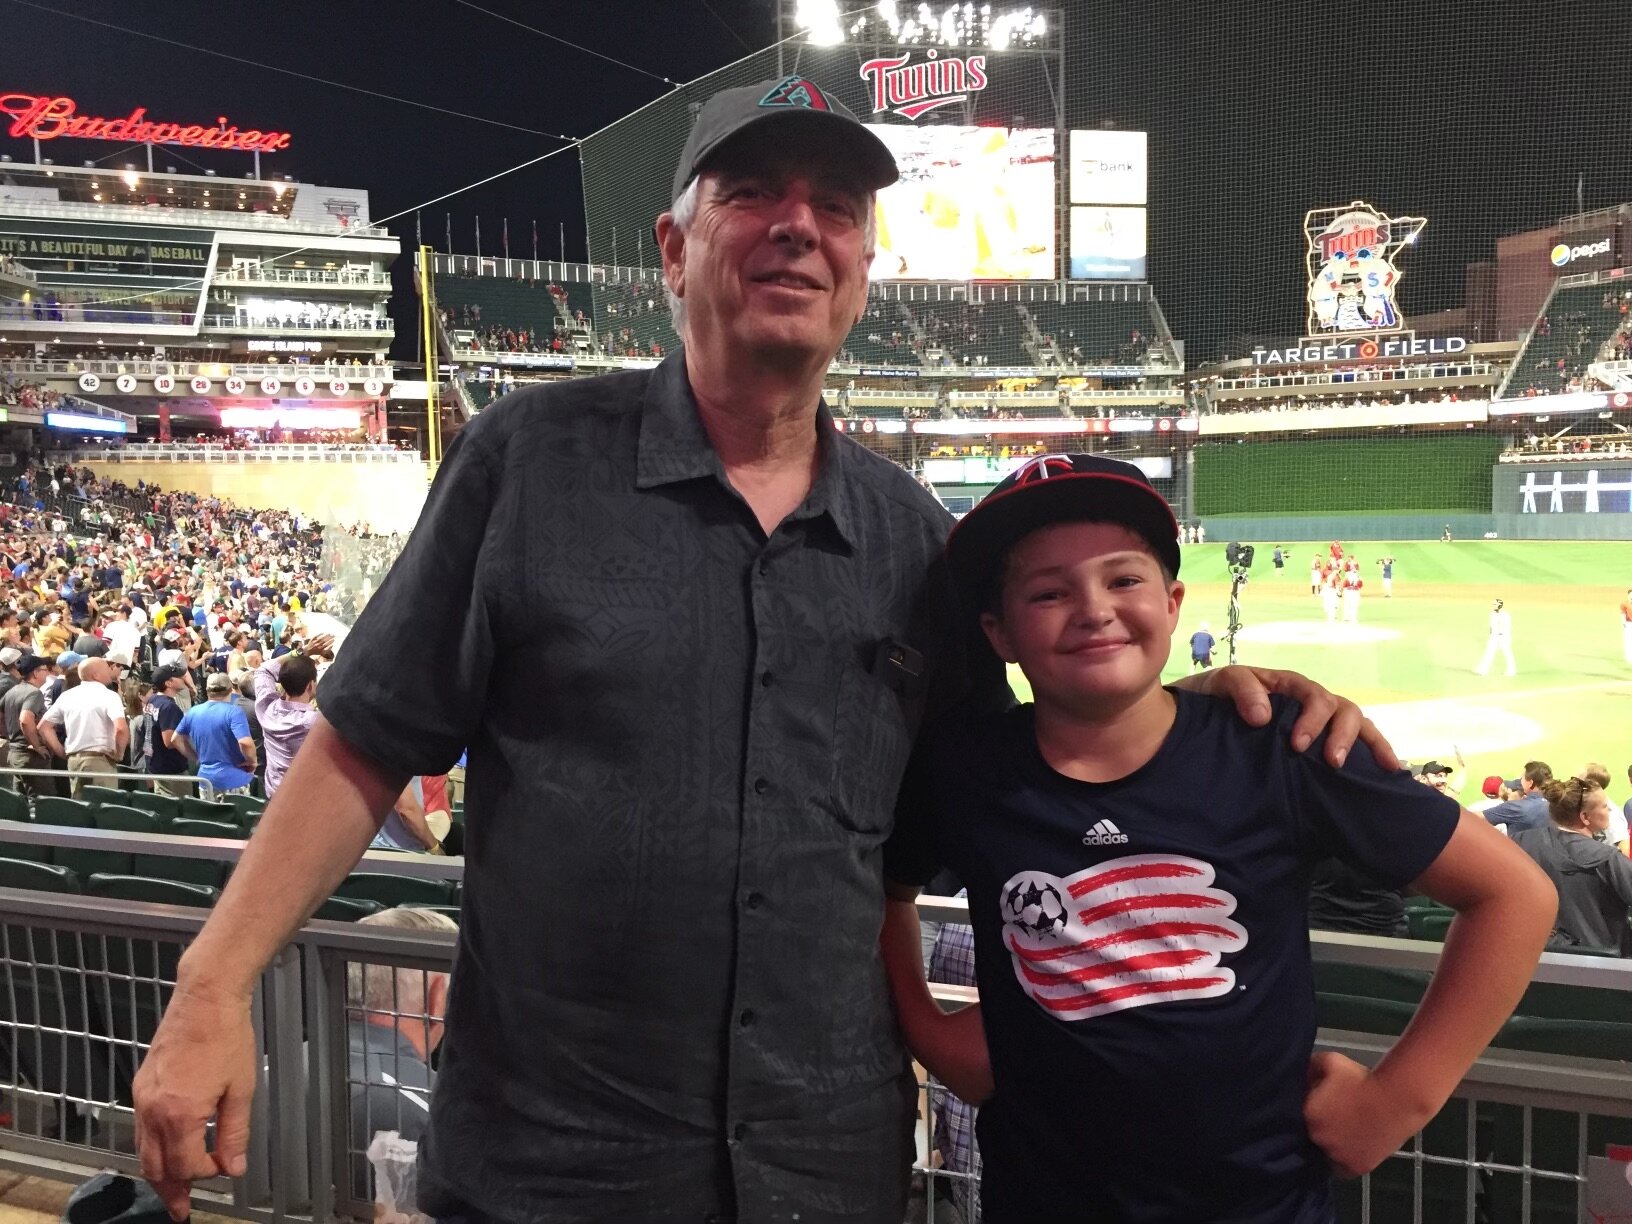 Ollie and I at Target Field - Minneapolis, home of the Twins